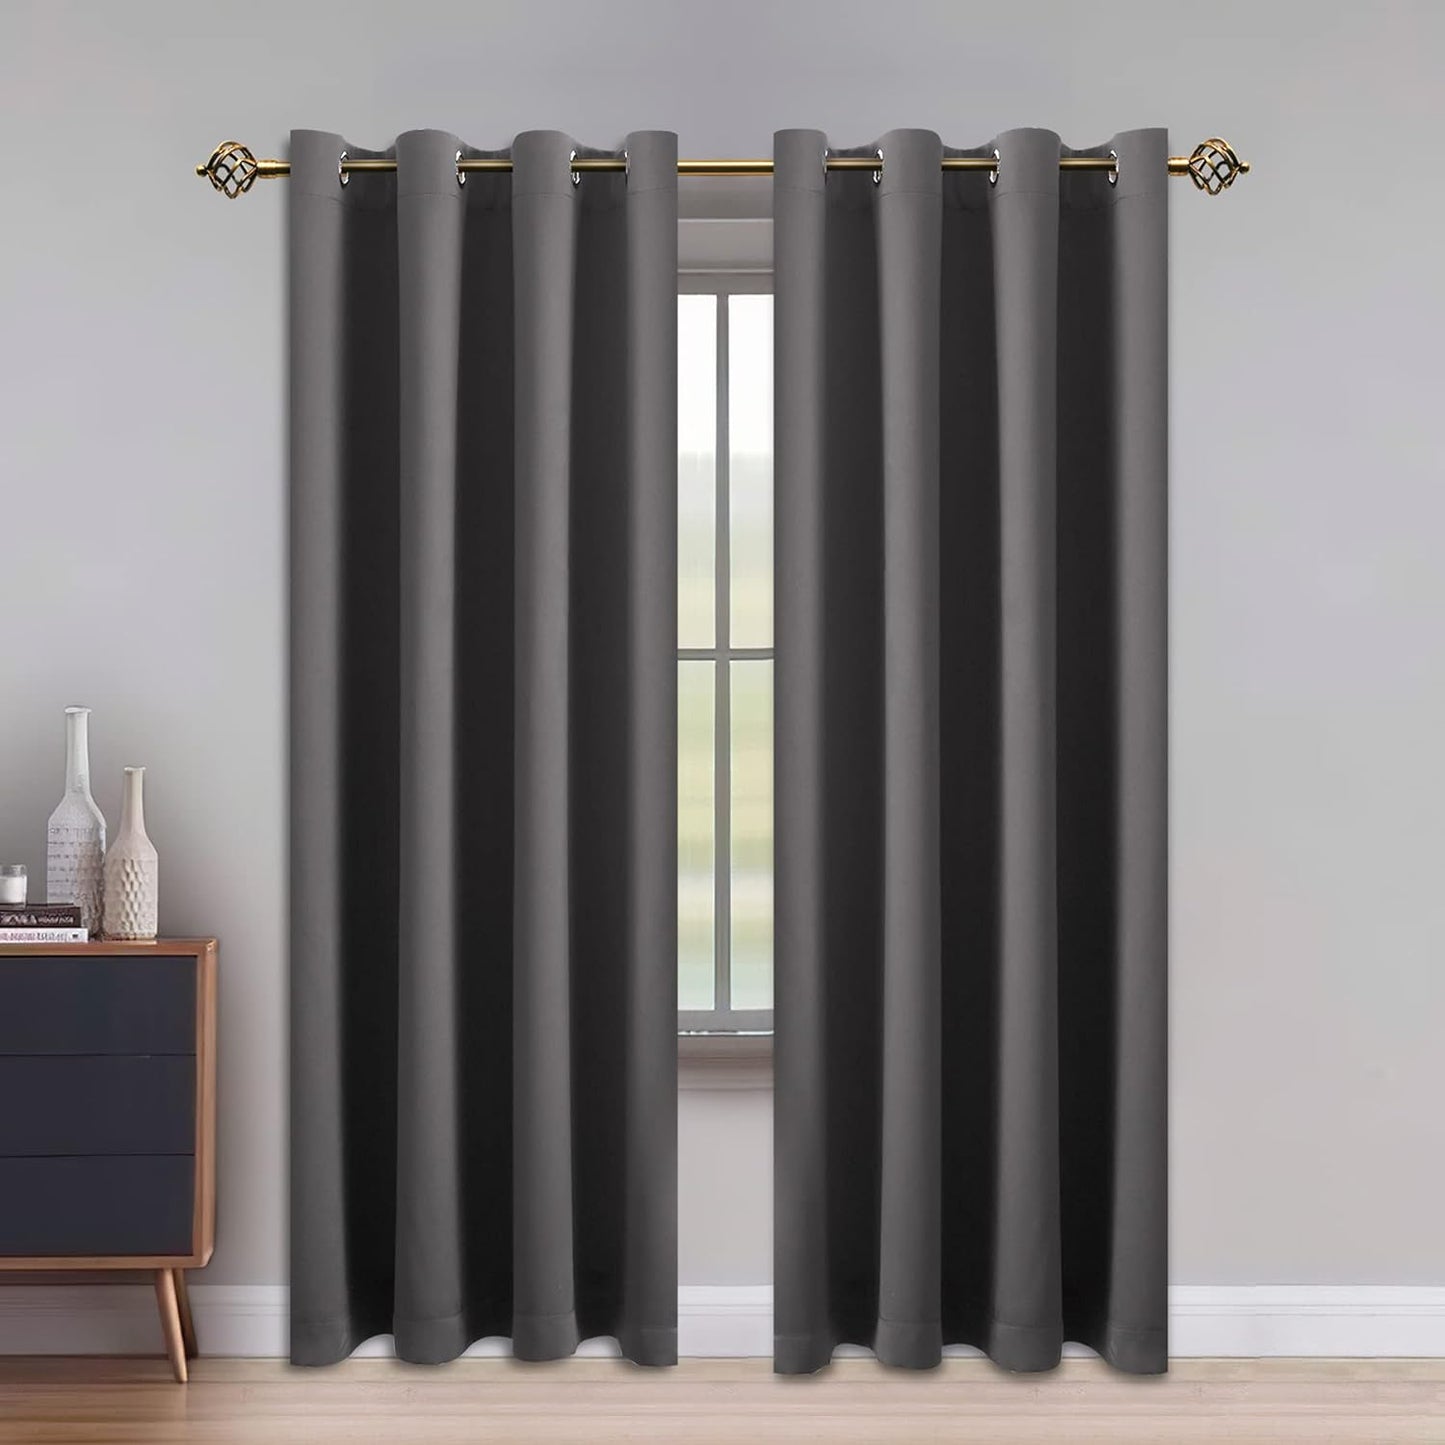 LUSHLEAF Blackout Curtains for Bedroom, Solid Thermal Insulated with Grommet Noise Reduction Window Drapes, Room Darkening Curtains for Living Room, 2 Panels, 52 X 63 Inch Grey  SHEEROOM Grey 52 X 95 Inch 